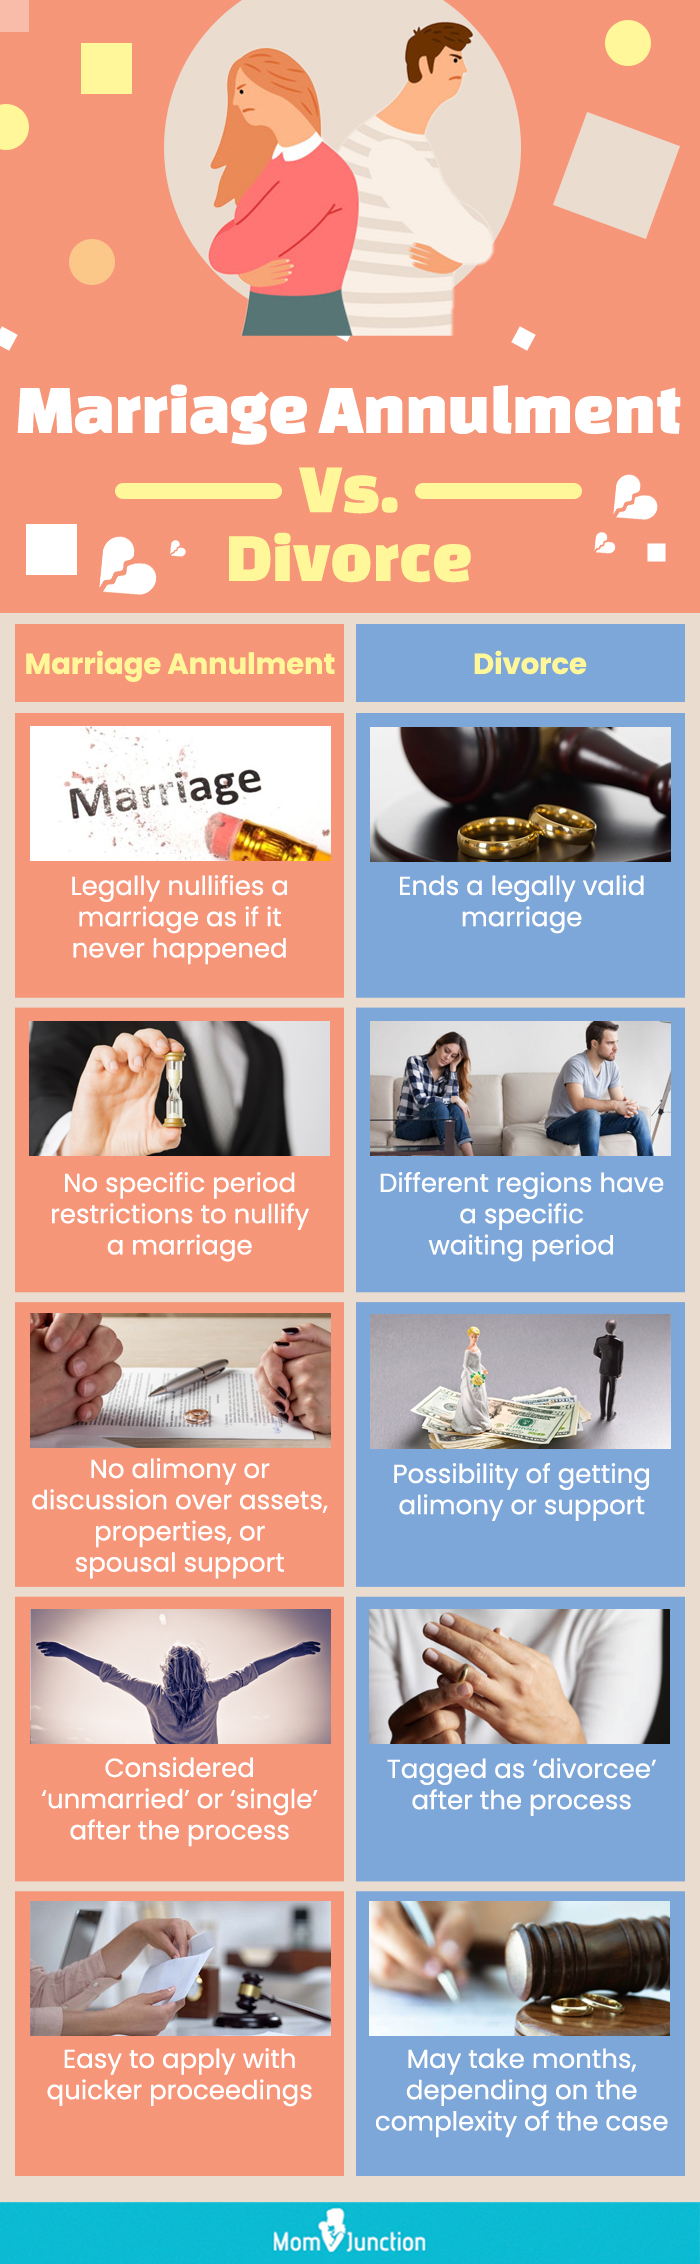 marriage annulment vs divorce (infographic)